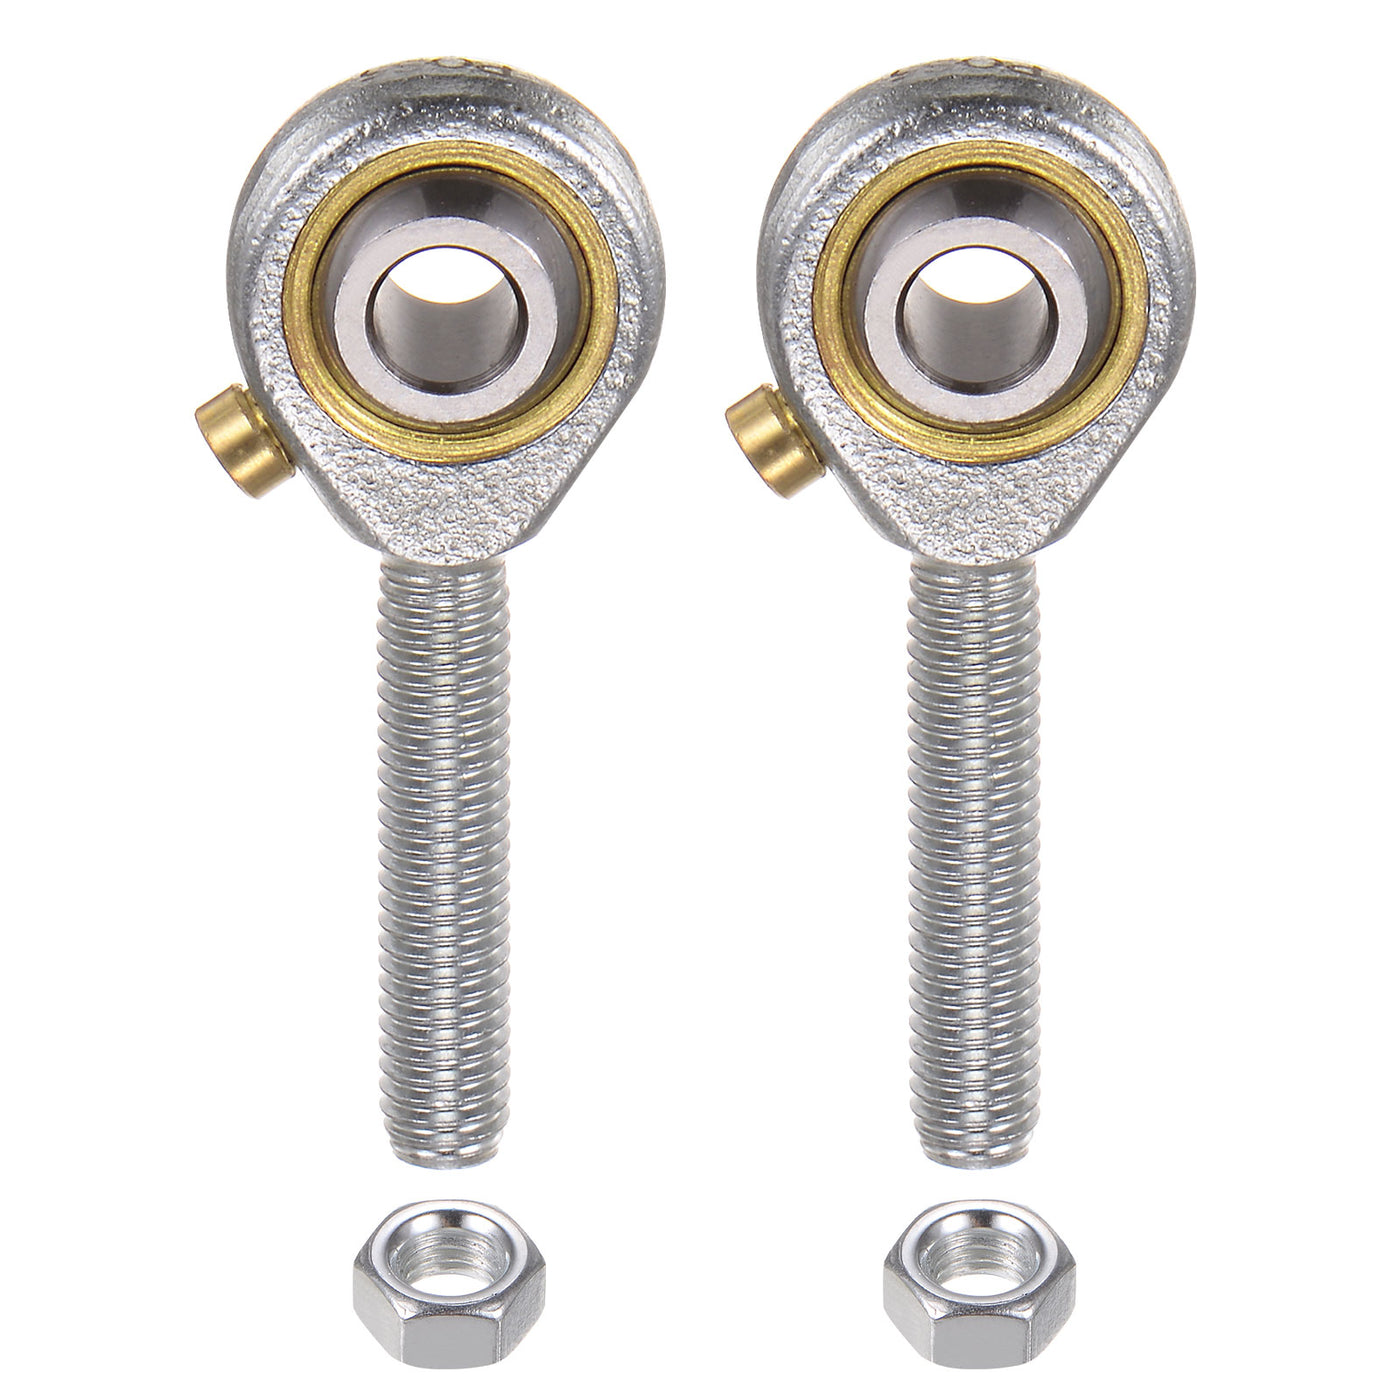 uxcell Uxcell 2pcs POS5 M5 Male Rod End Bearing M5x0.8 Right Hand Thread,Includes Jam Nut